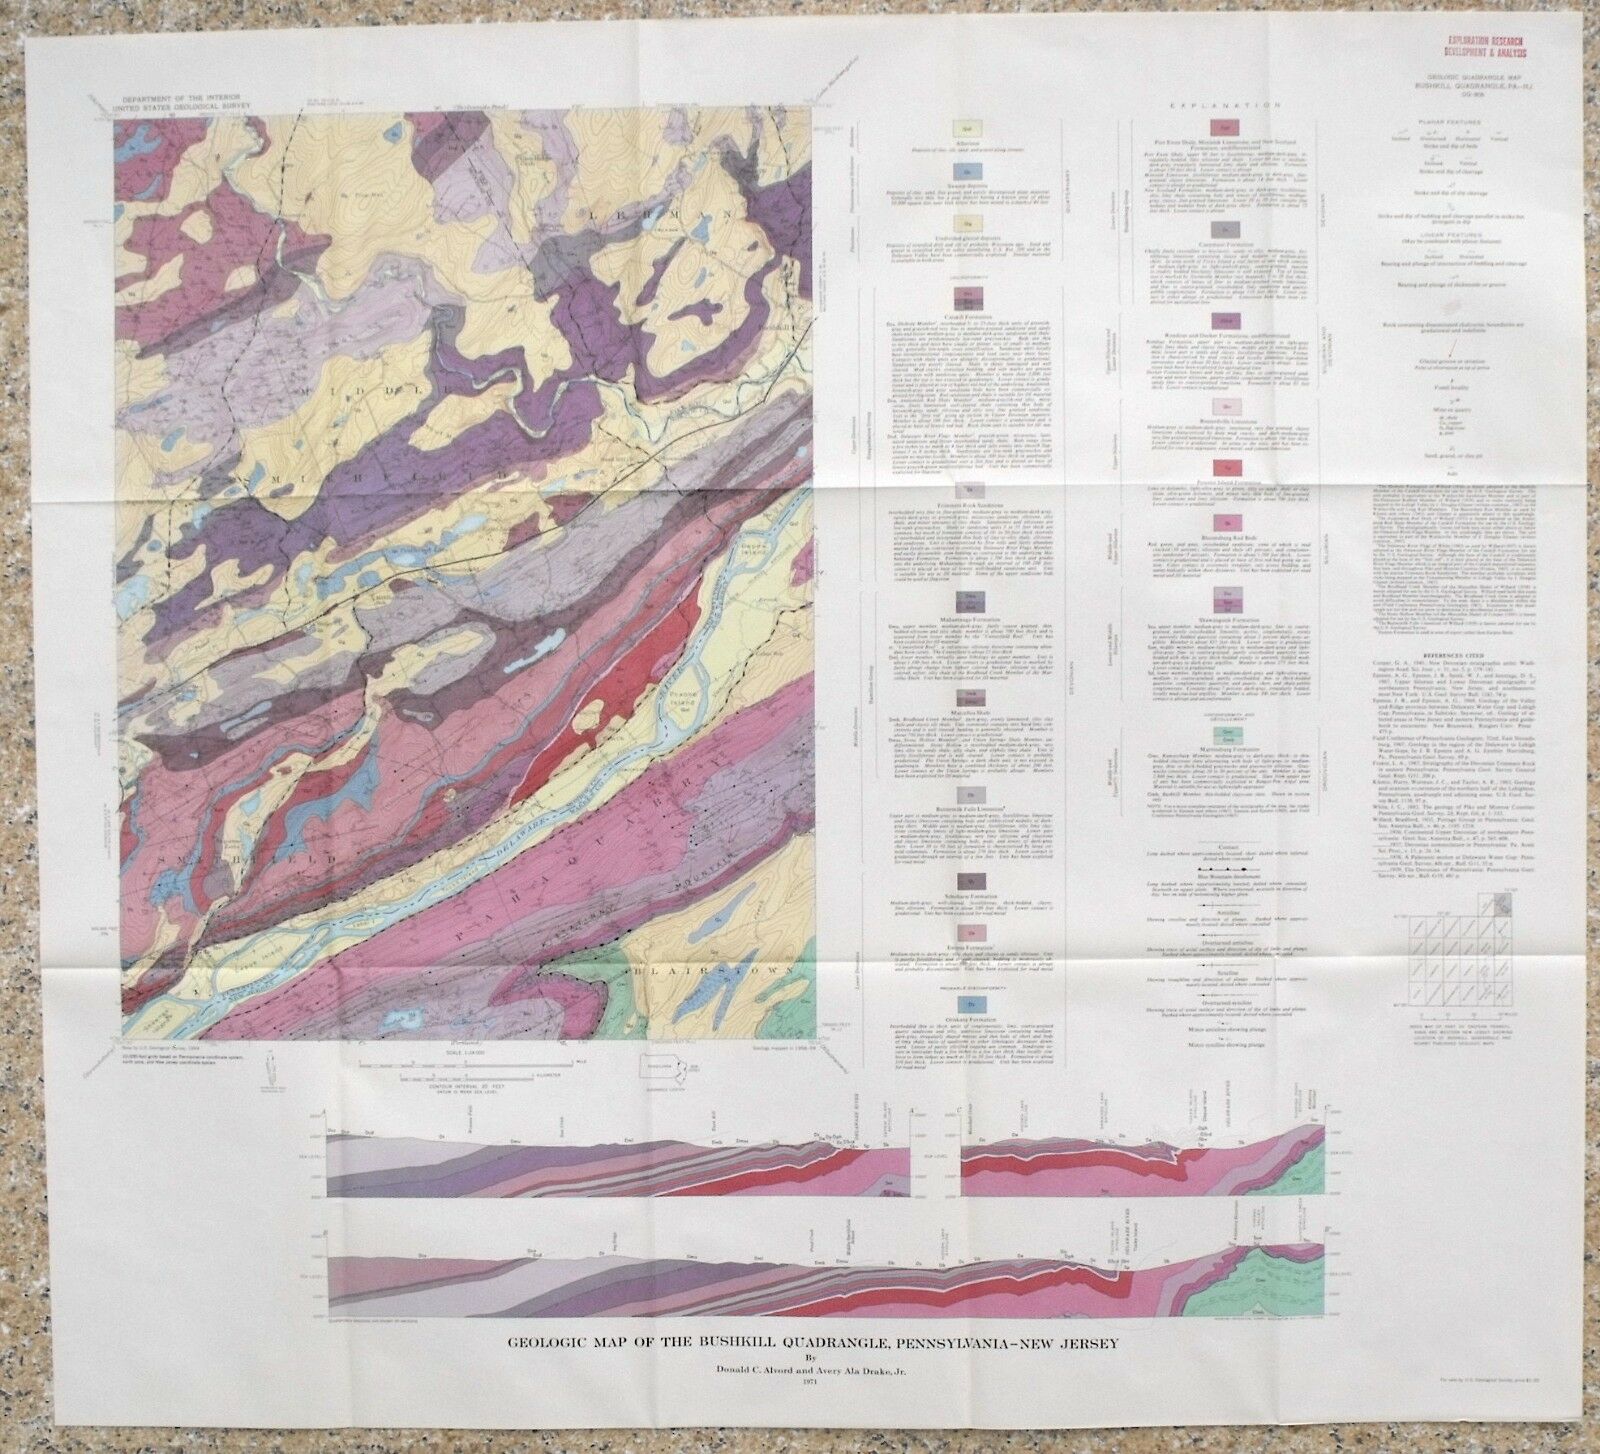 Usgs Bushkill, New Jersey Geologic Map, Full Color With Original Sleeve 1971